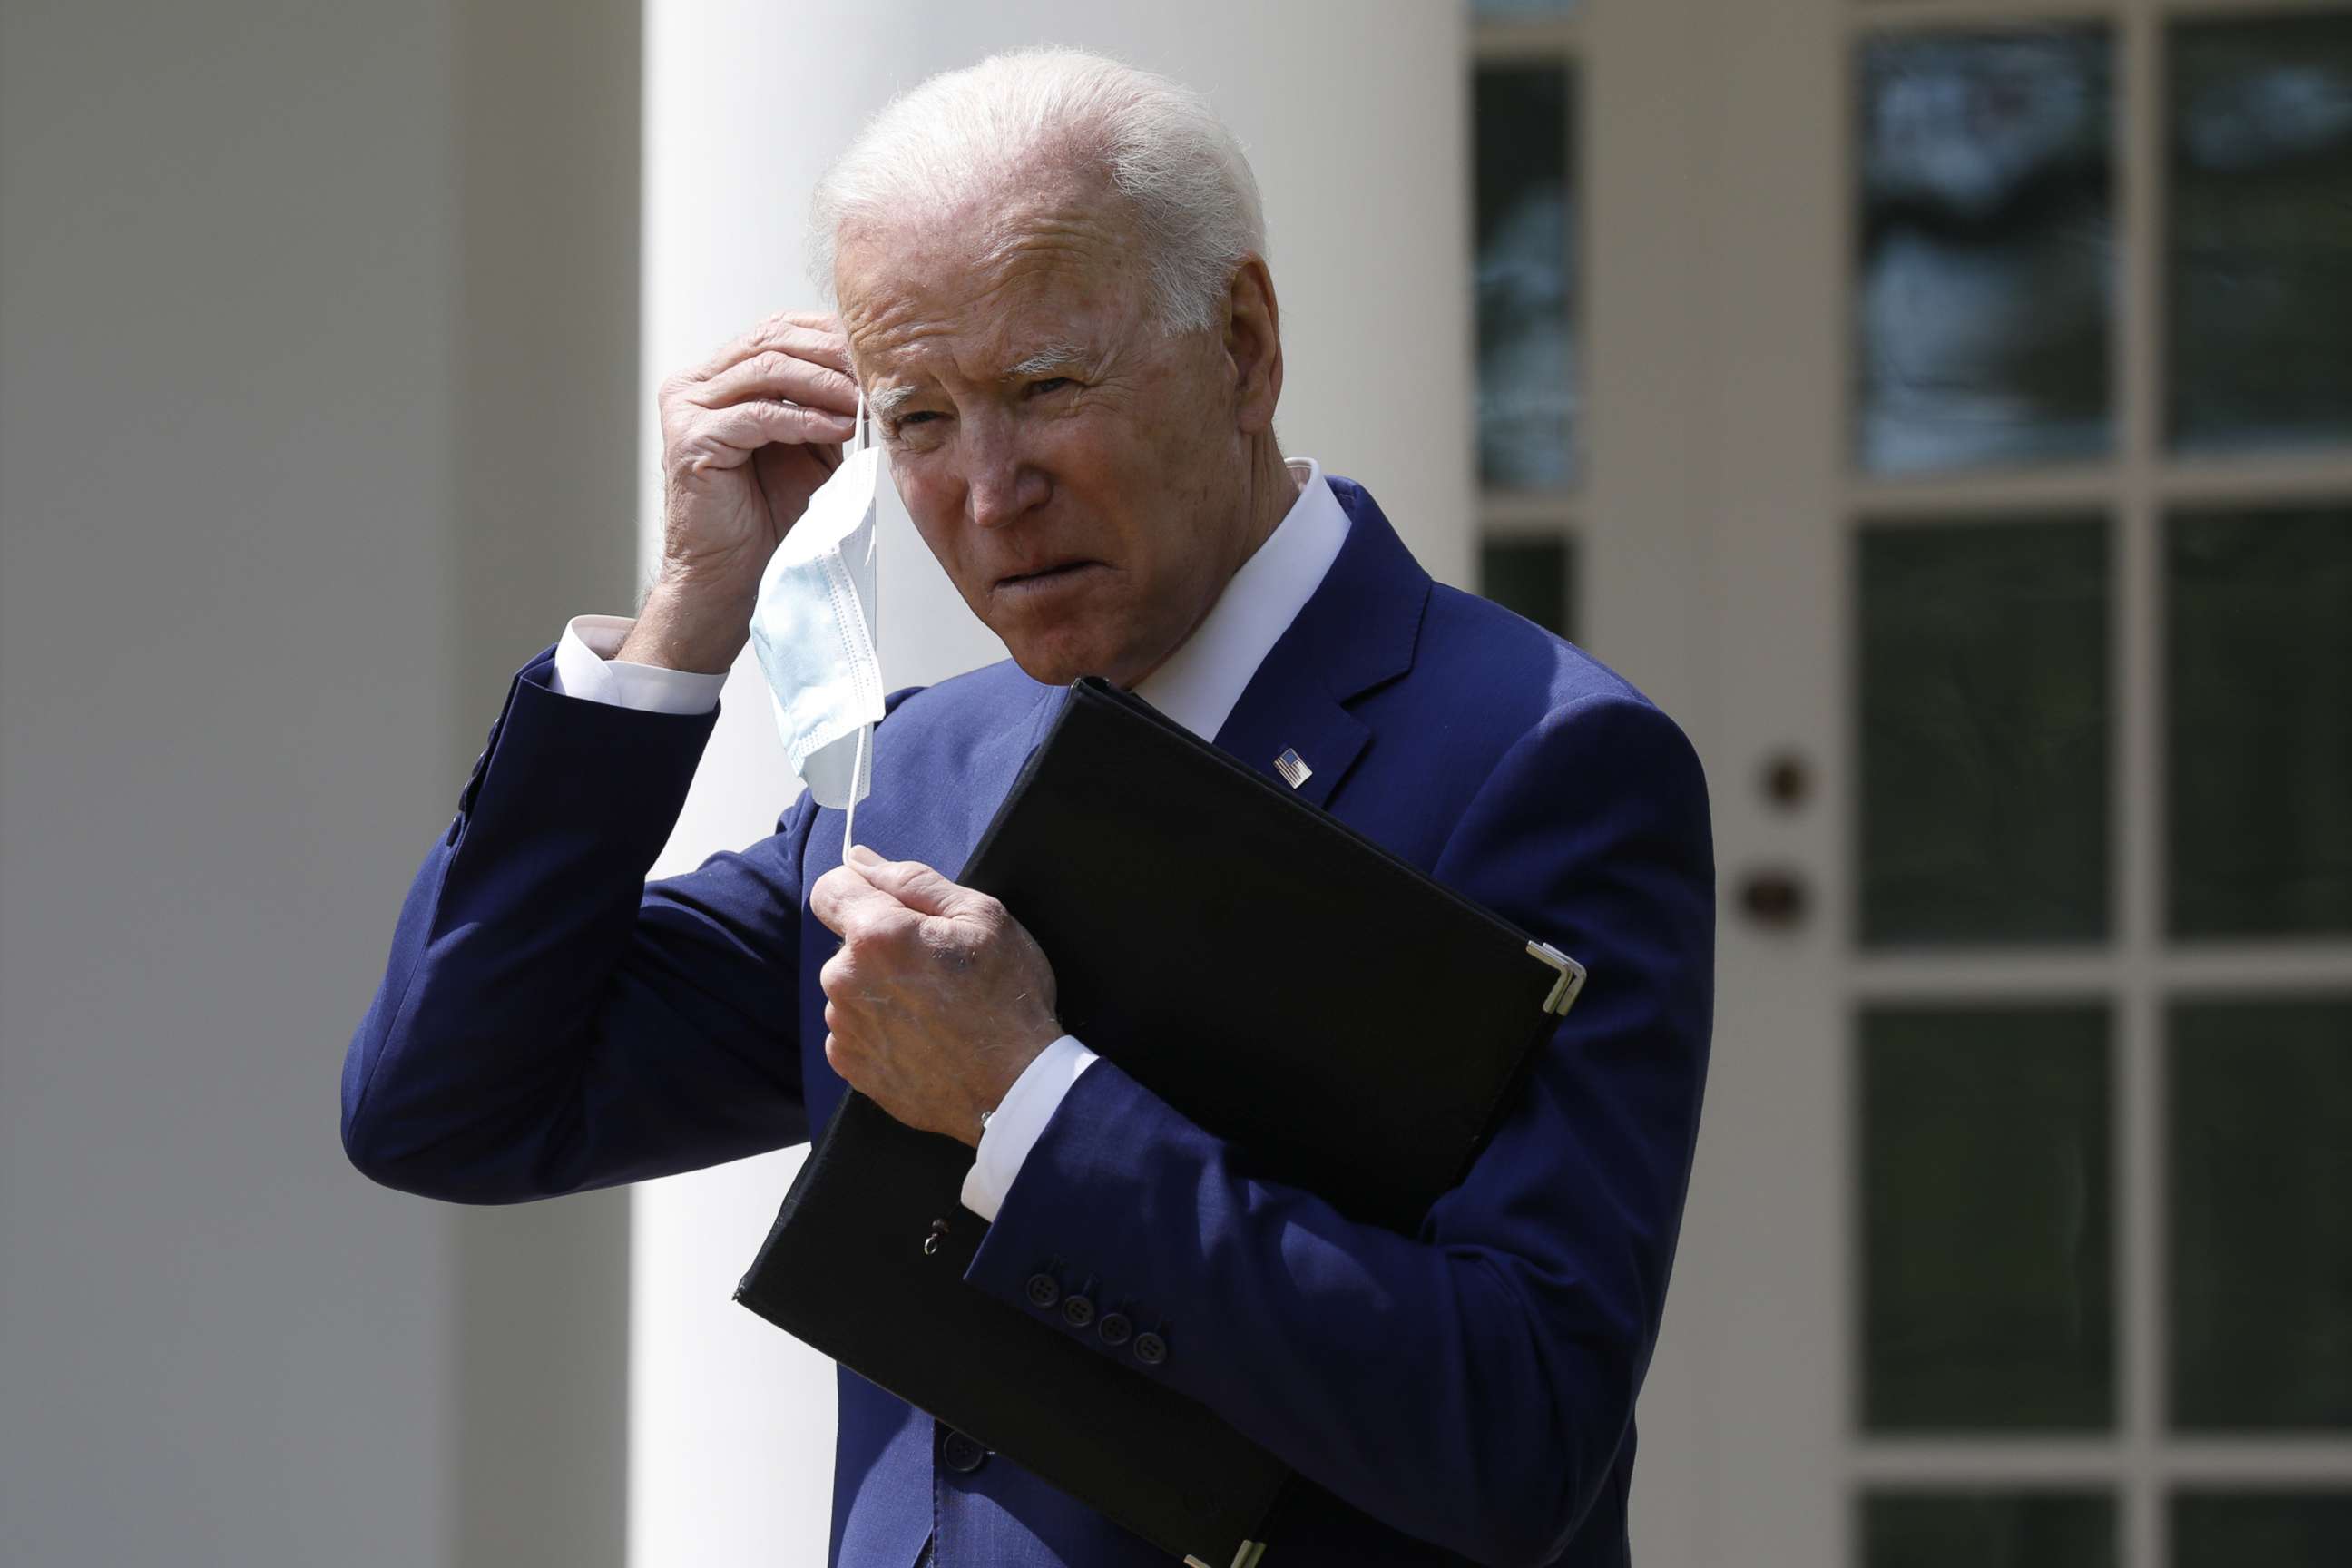 PHOTO: President Joe Biden wears a protective face mask after delivering remarks on gun violence prevention in the Rose Garden of the White House in Washington, D.C., on April 8, 2021.